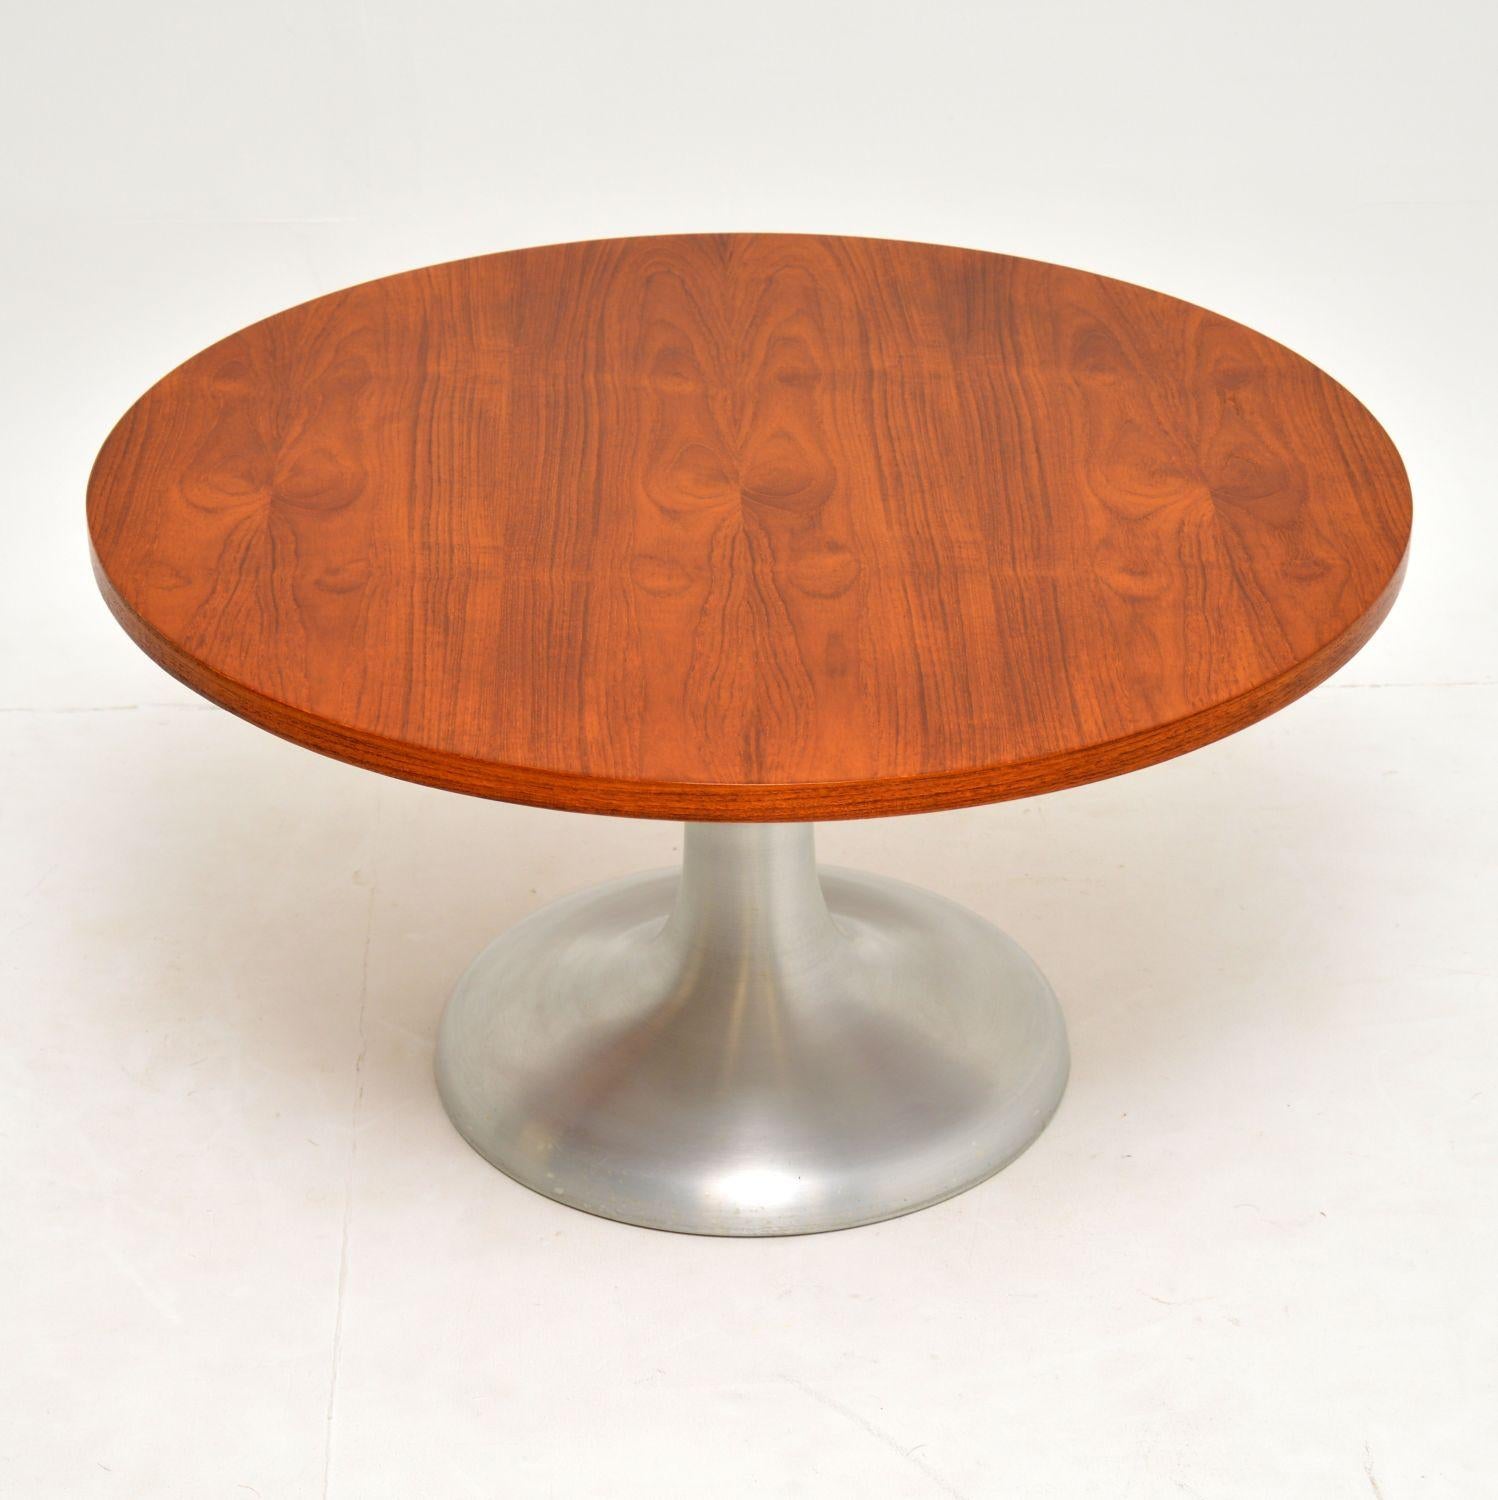 A stylish and very well made vintage coffee table, this dates from the 1960-70’s.

It has a beautiful circular teak top, and sits on a brushed steel tulip base. We have had the teak stripped and re-polished to a very high standard, the condition is